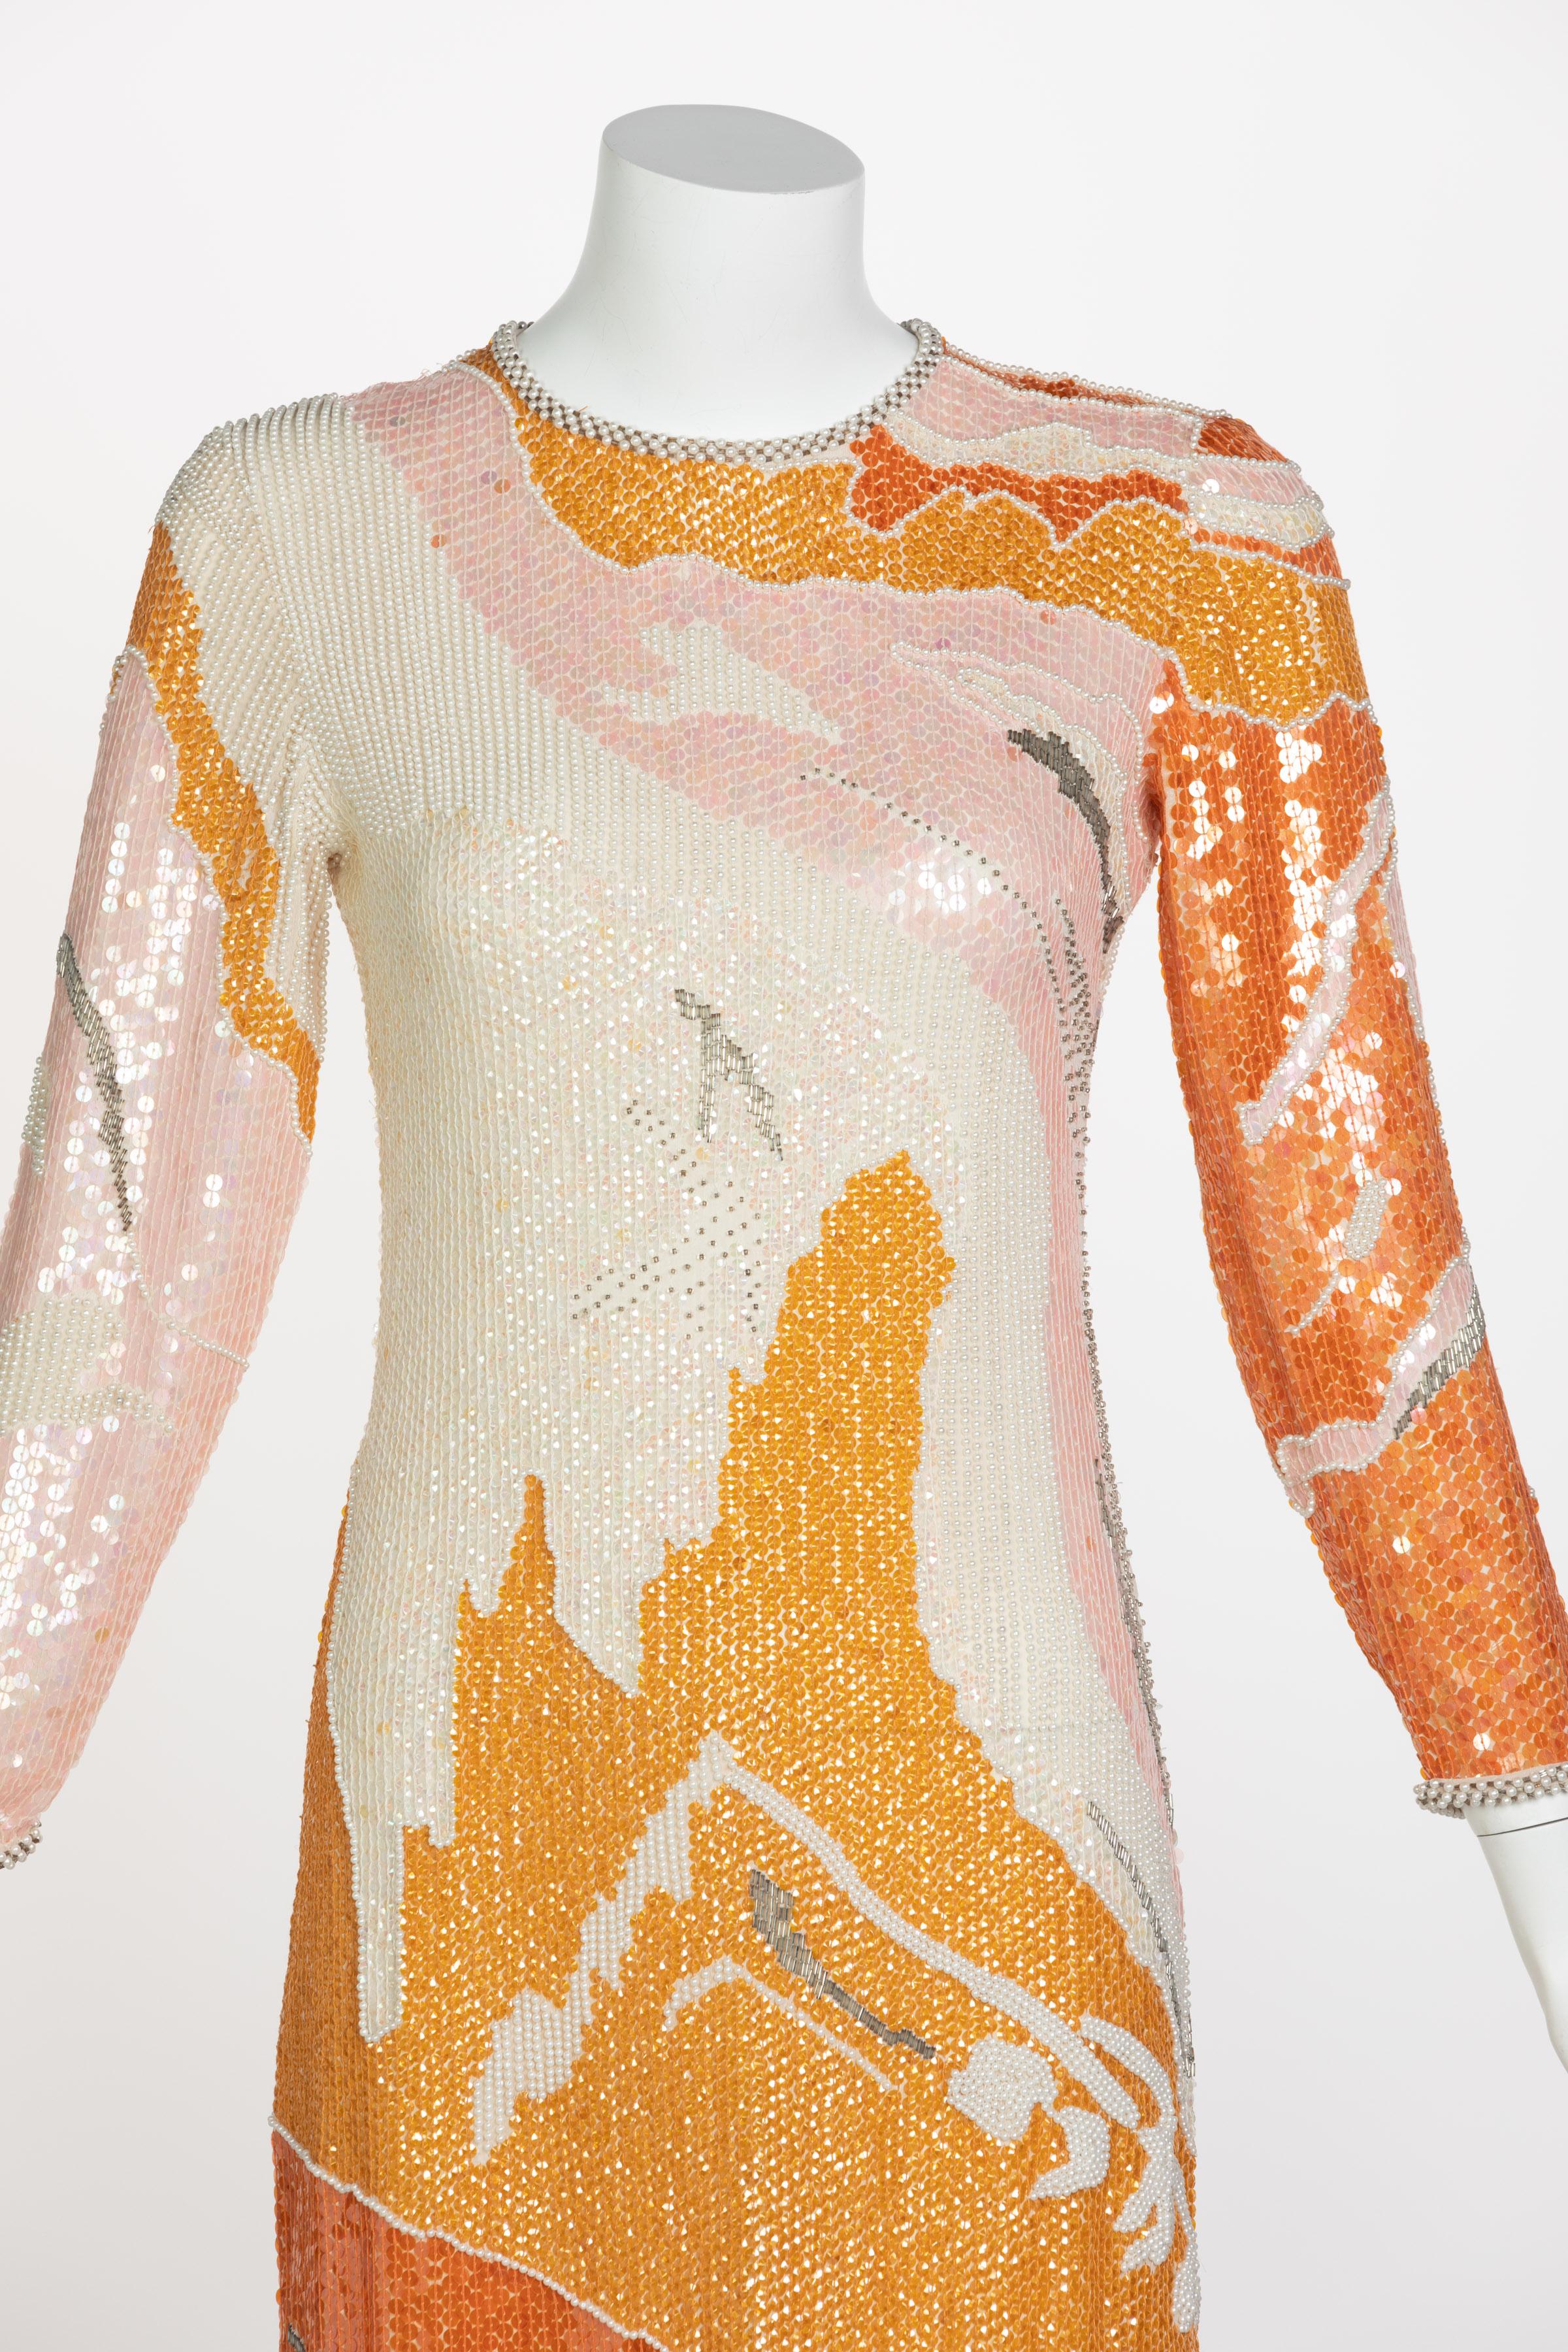 Halston Couture Sequin Pearl Beaded Sunset Colors Dress Documented, 1980s 2